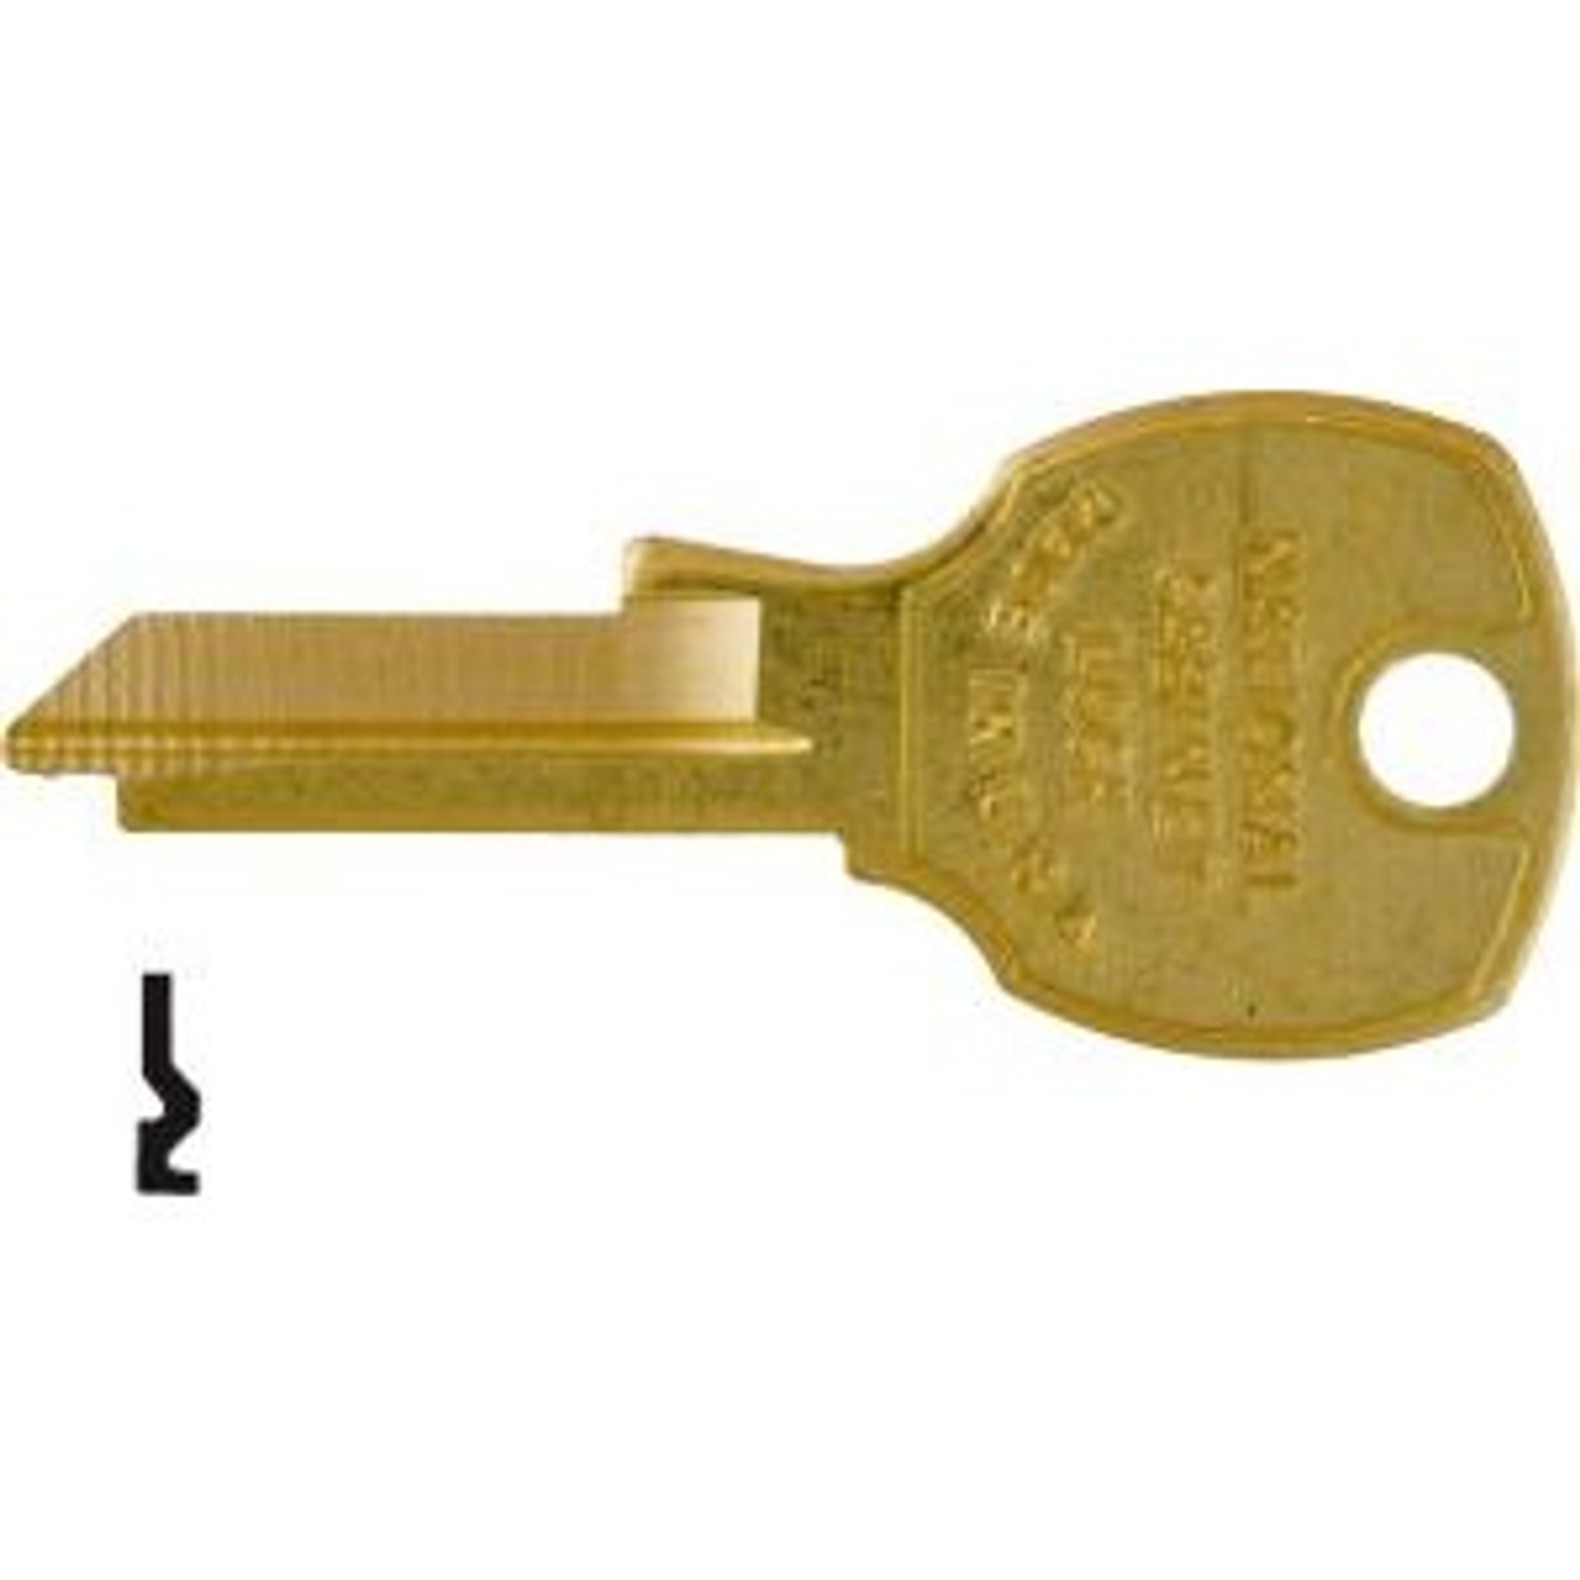 CompX National CompX National D4300 Replacement Key Blanks (50 Pack) - KAL  DOOR HARDWARE